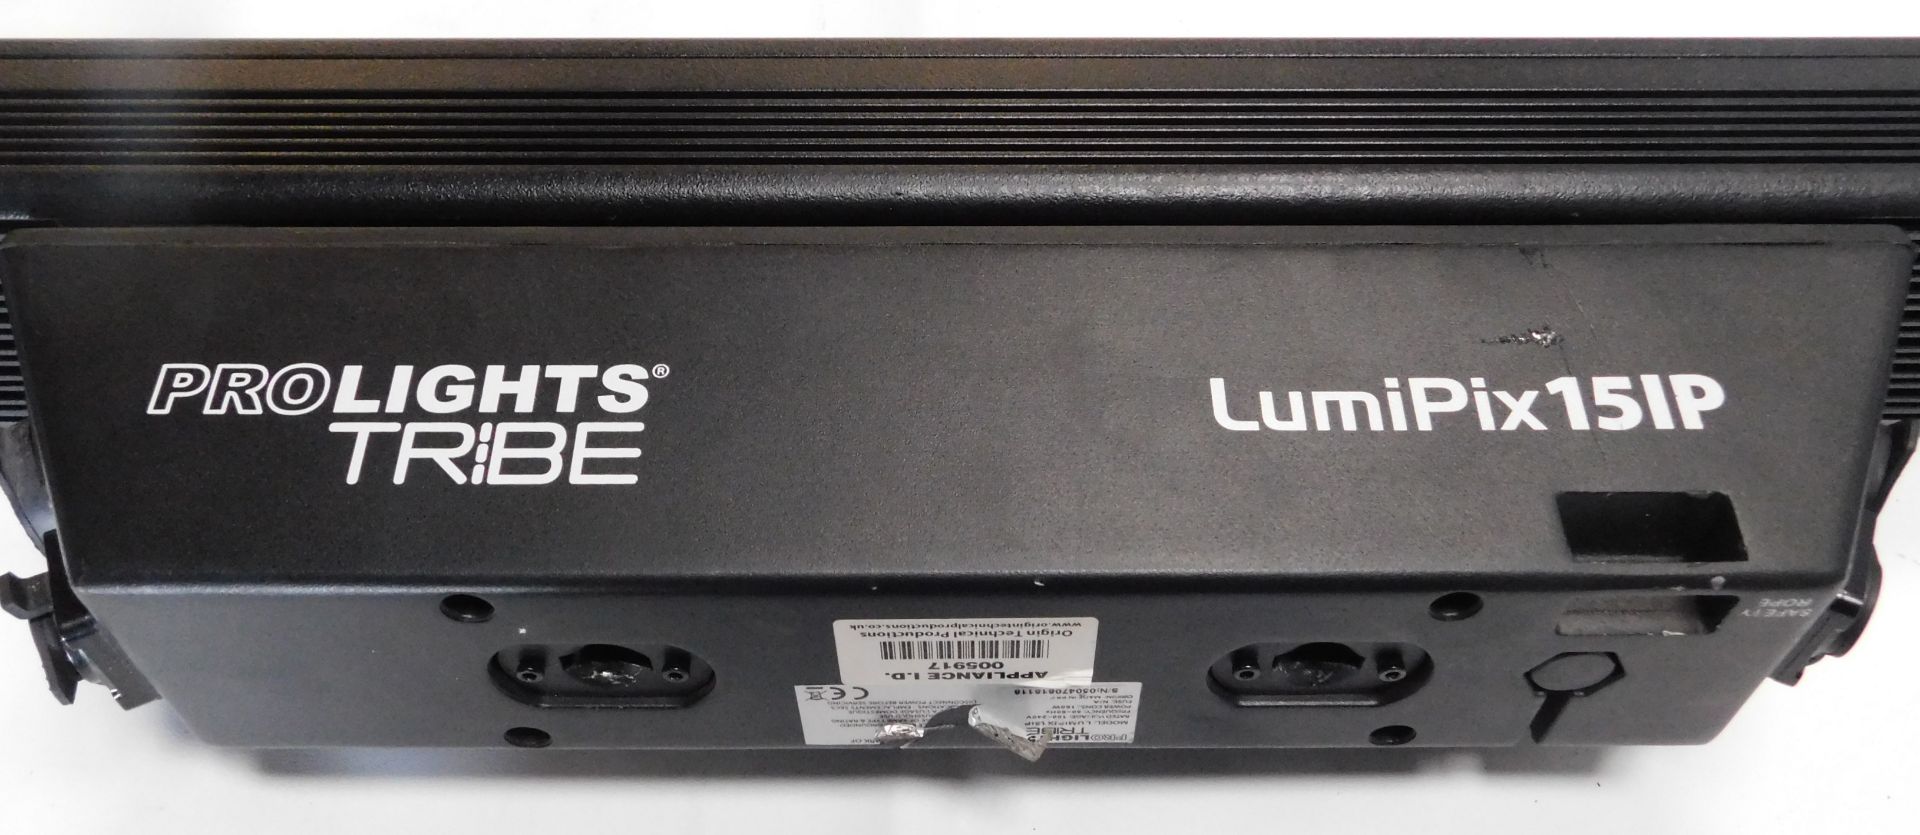 6 Prolights LumiPix 15IPx LED Pixel Battens in Flight Case (Location: Brentwood. Please Refer to - Image 4 of 5